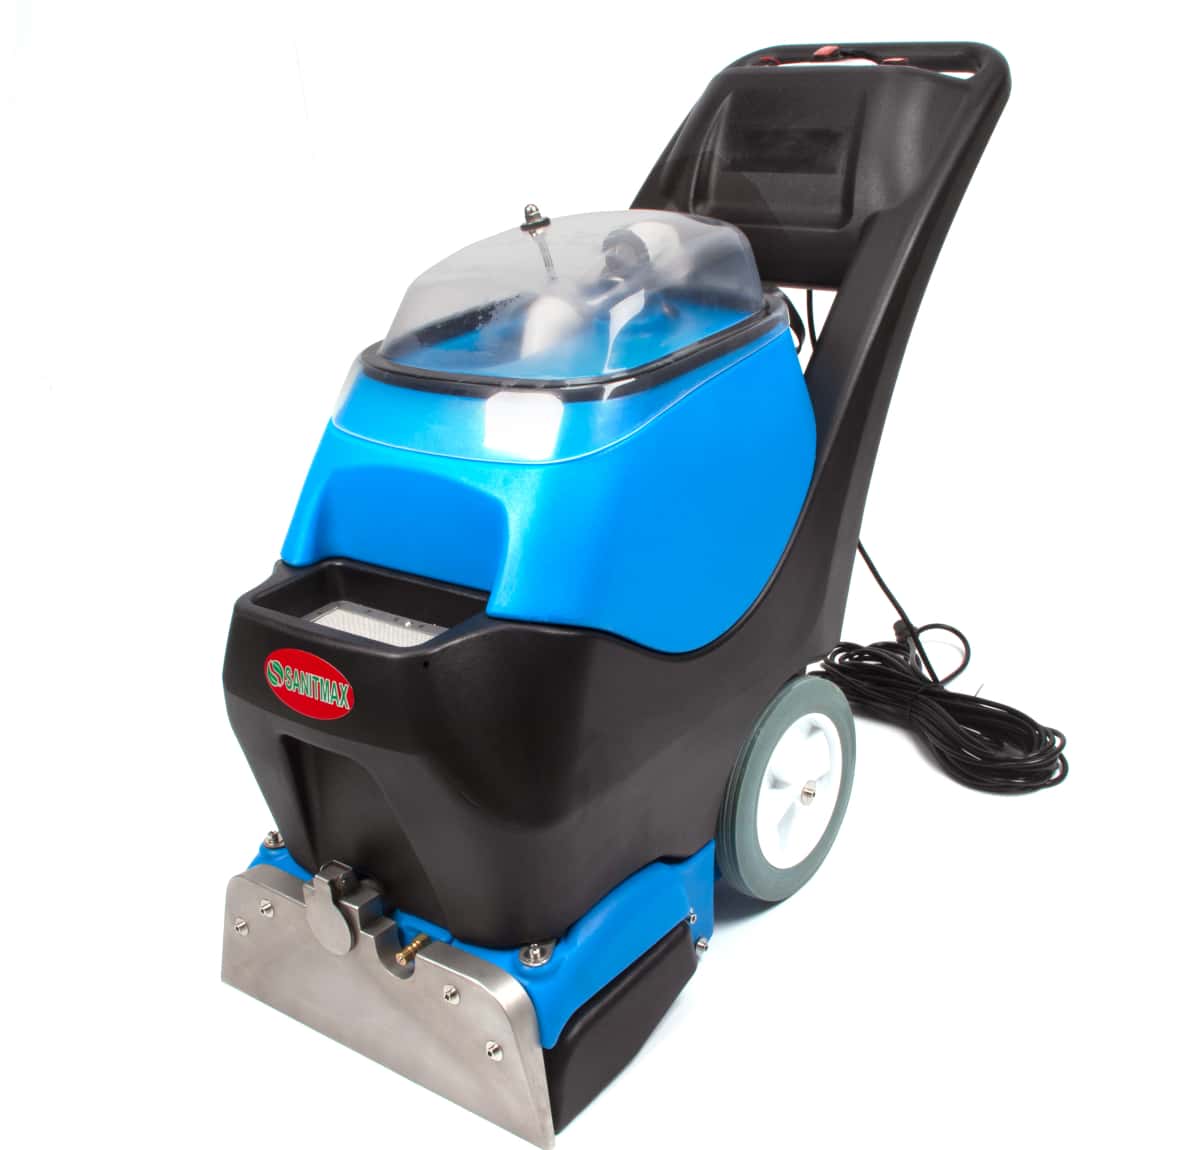 SM350 Walk-behind Commercial Carpet Extractor, 13.8" Cleaning Width, 120V, 10.5 gal Solution Tank Capacity